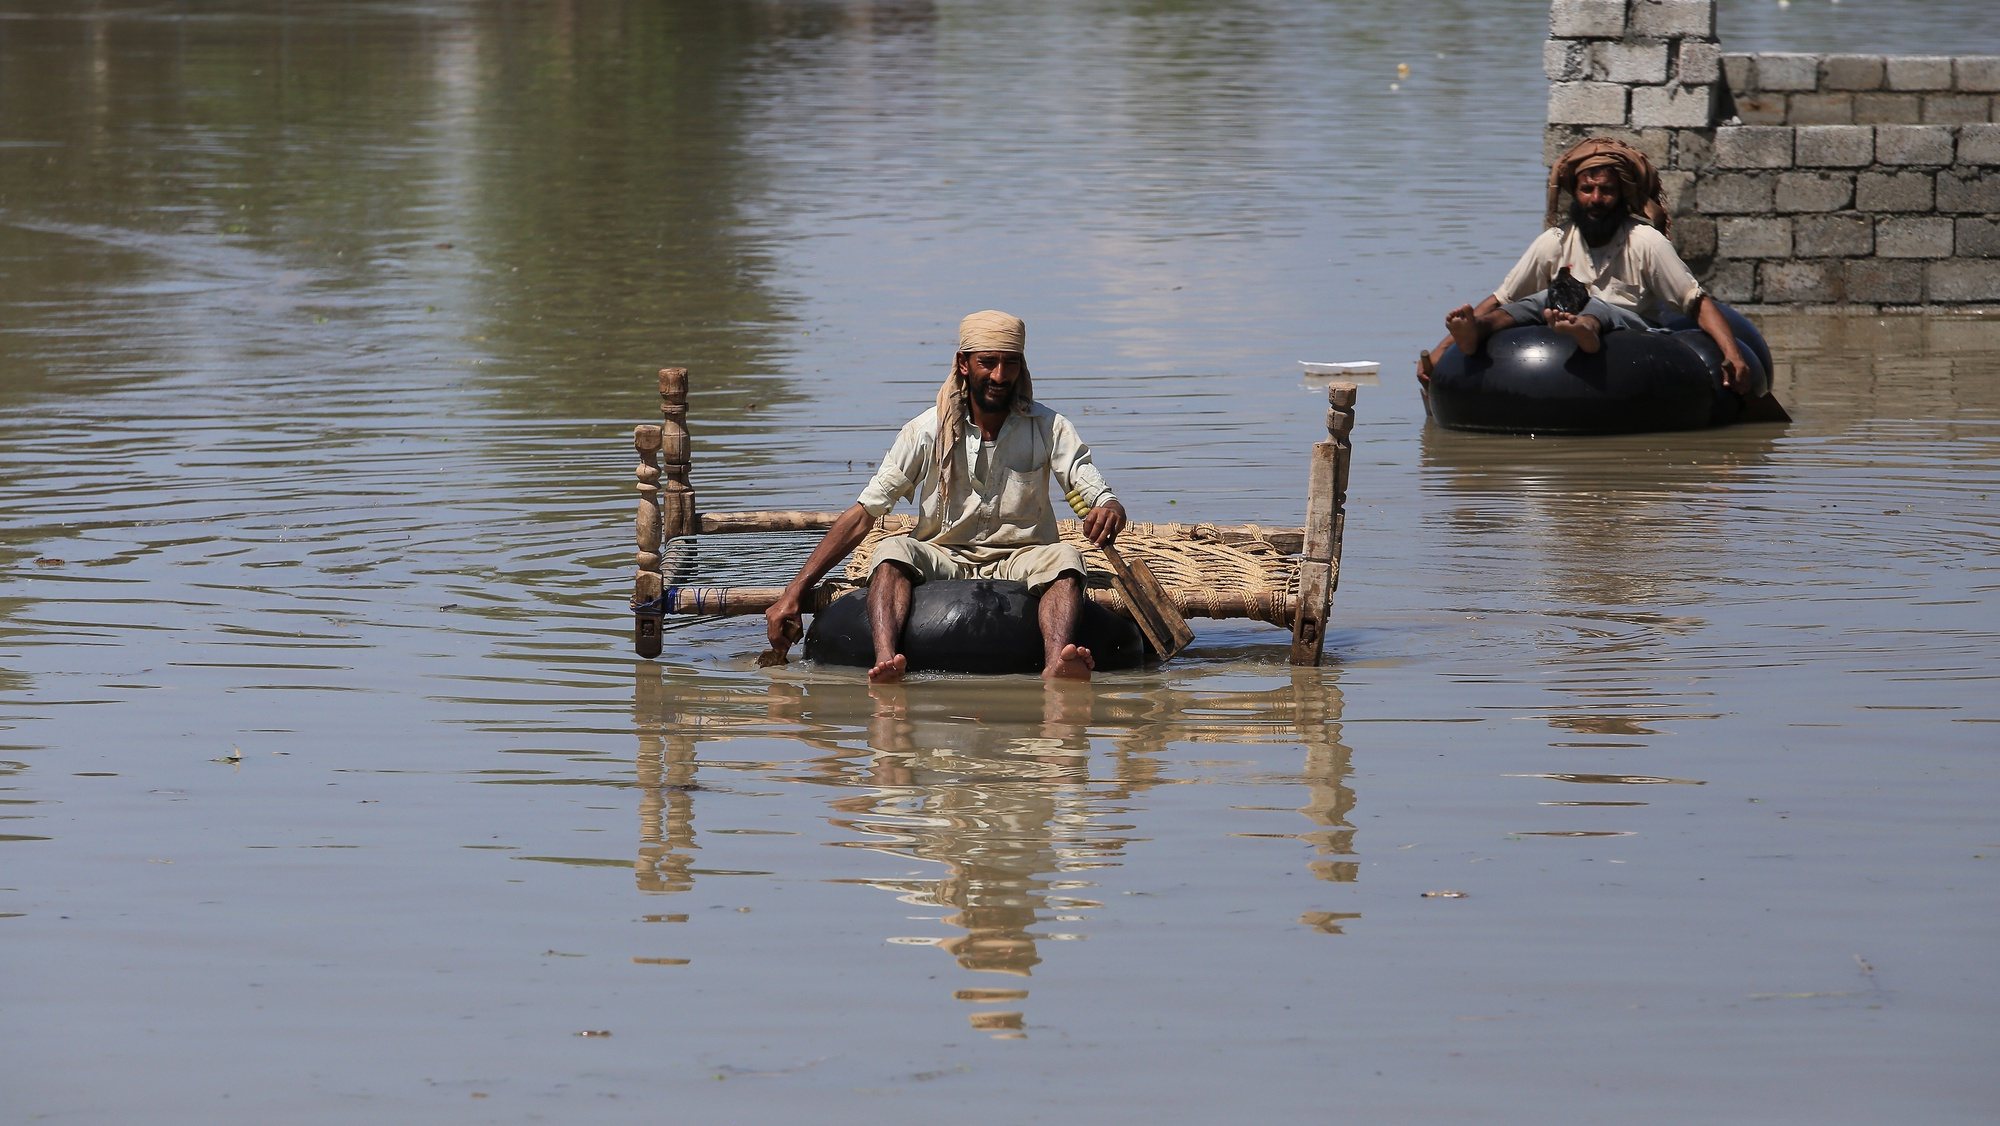 epa10143298 A man rides an improvised floating device in a flooded area following heavy rains in Charsadda District, Khyber Pakhtunkhwa province, Pakistan, 28 August 2022. According to the National Disaster Management Authority (NDMA) on 27 August, flash floods triggered by heavy monsoon rains have killed over 1,000 people across Pakistan since mid-June 2022. More than 33 million people have been affected by floods, the country&#039;s climate change minister said.  EPA/ARSHAD ARBAB